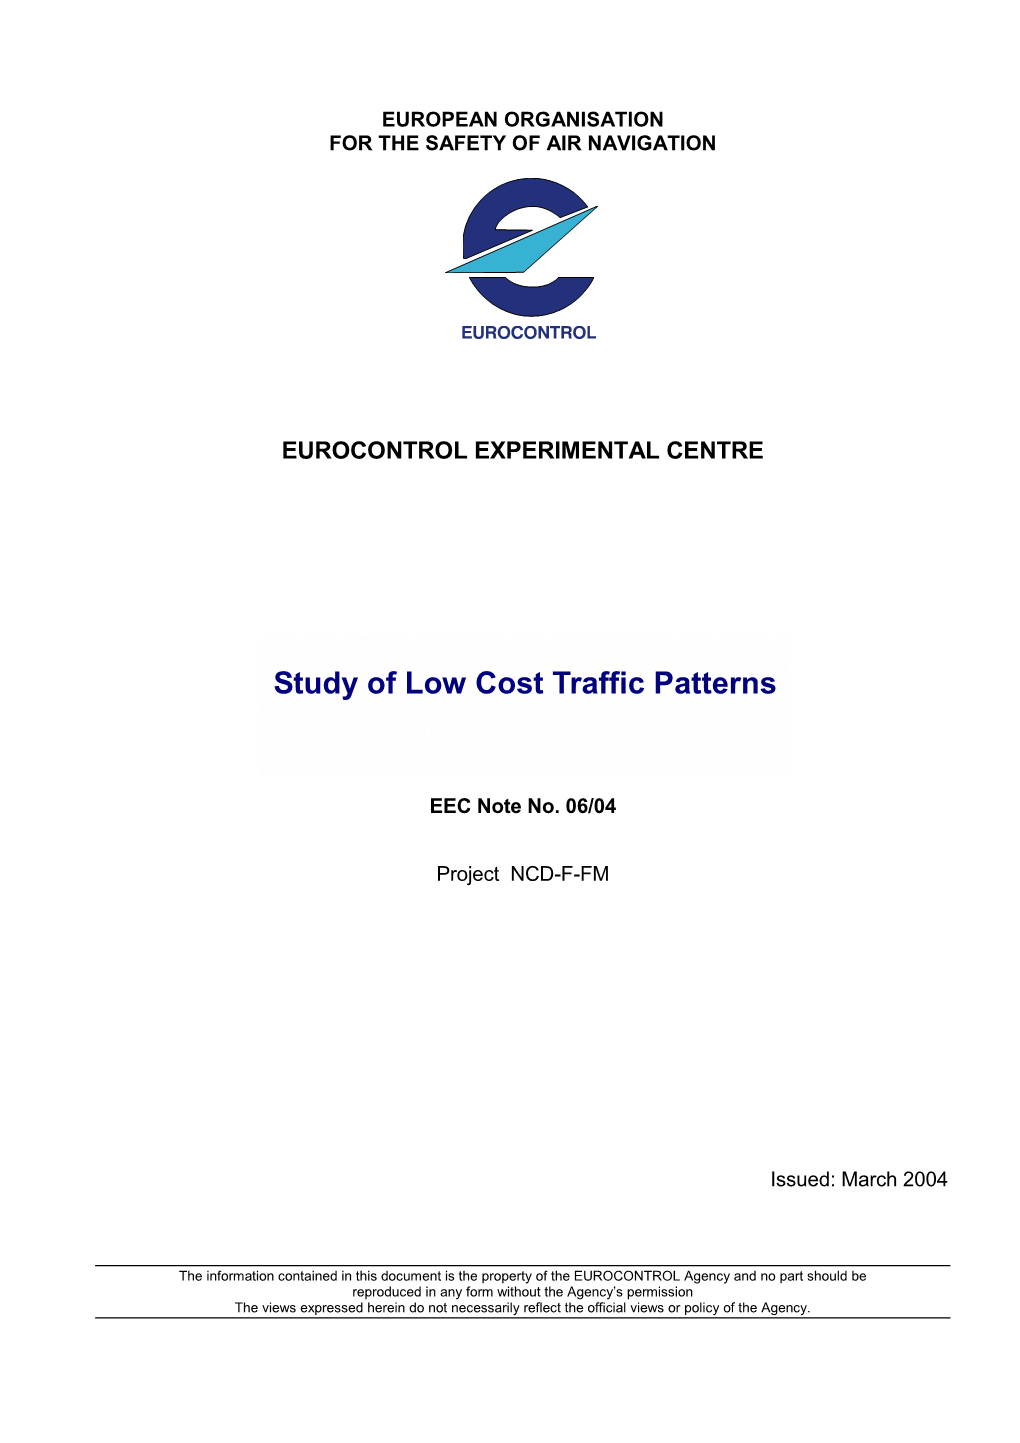 Study of Low Cost Traffic Patterns